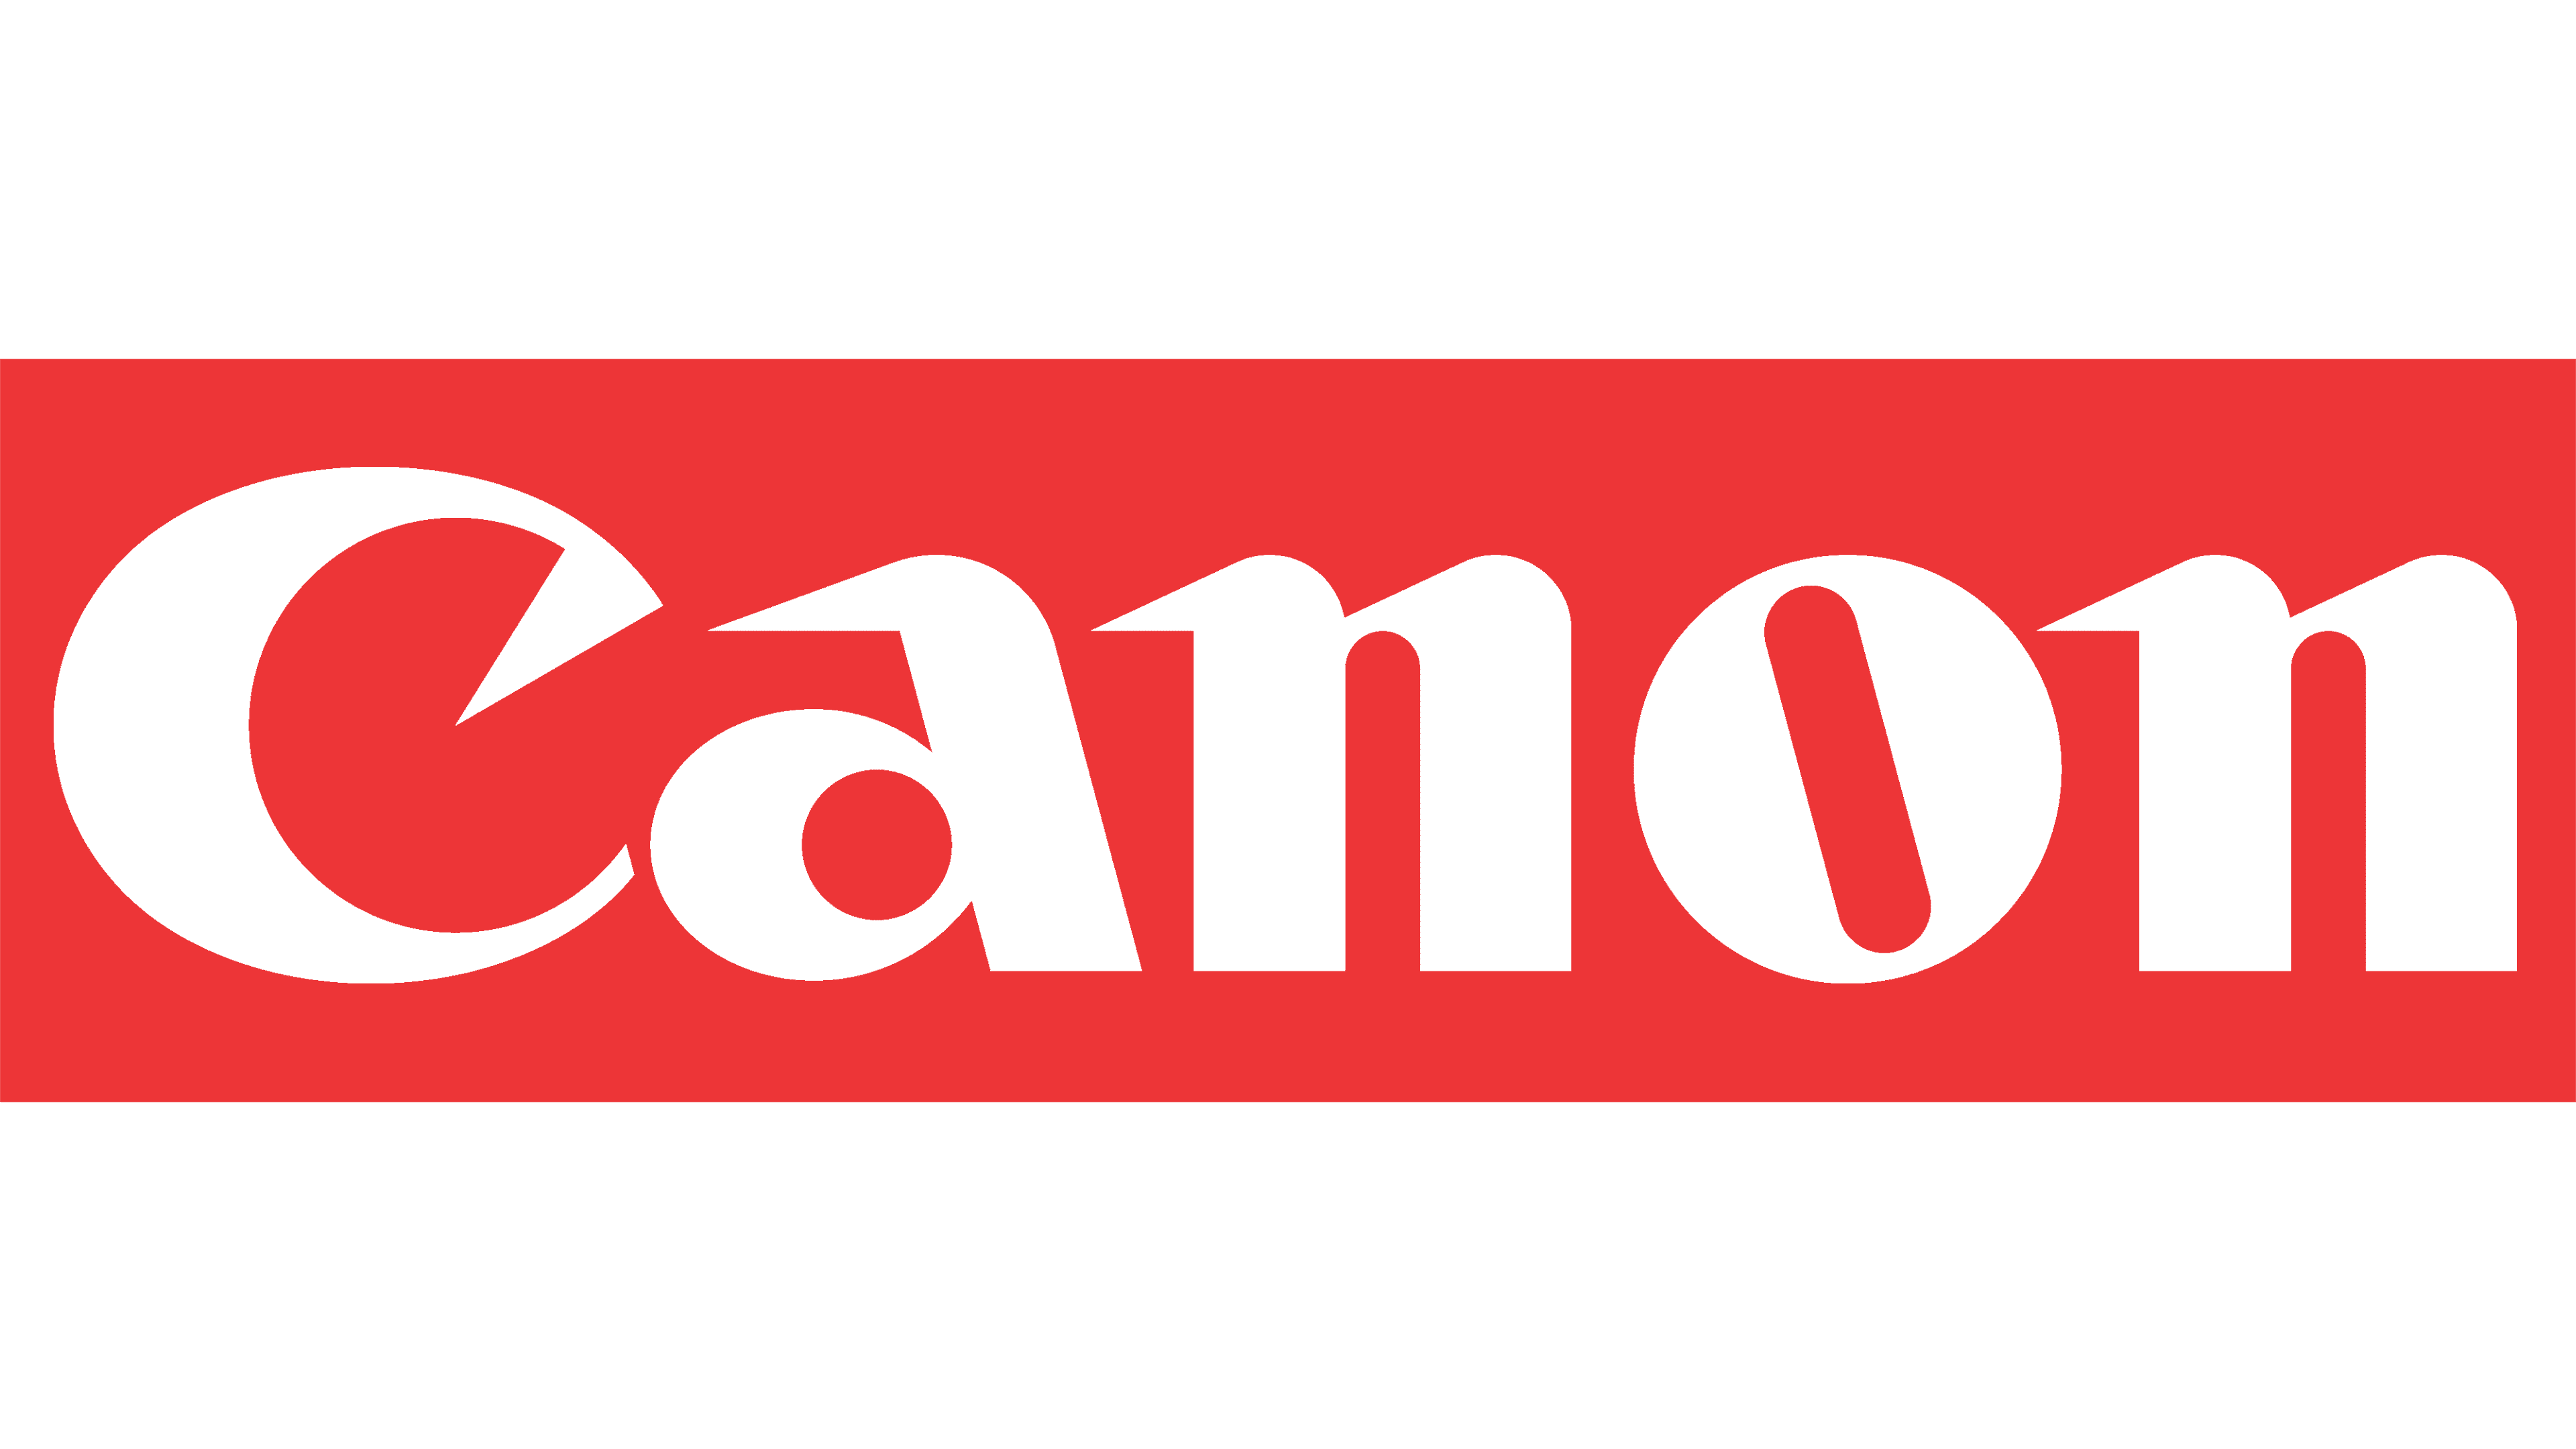 Canon Logo Download Free PNG